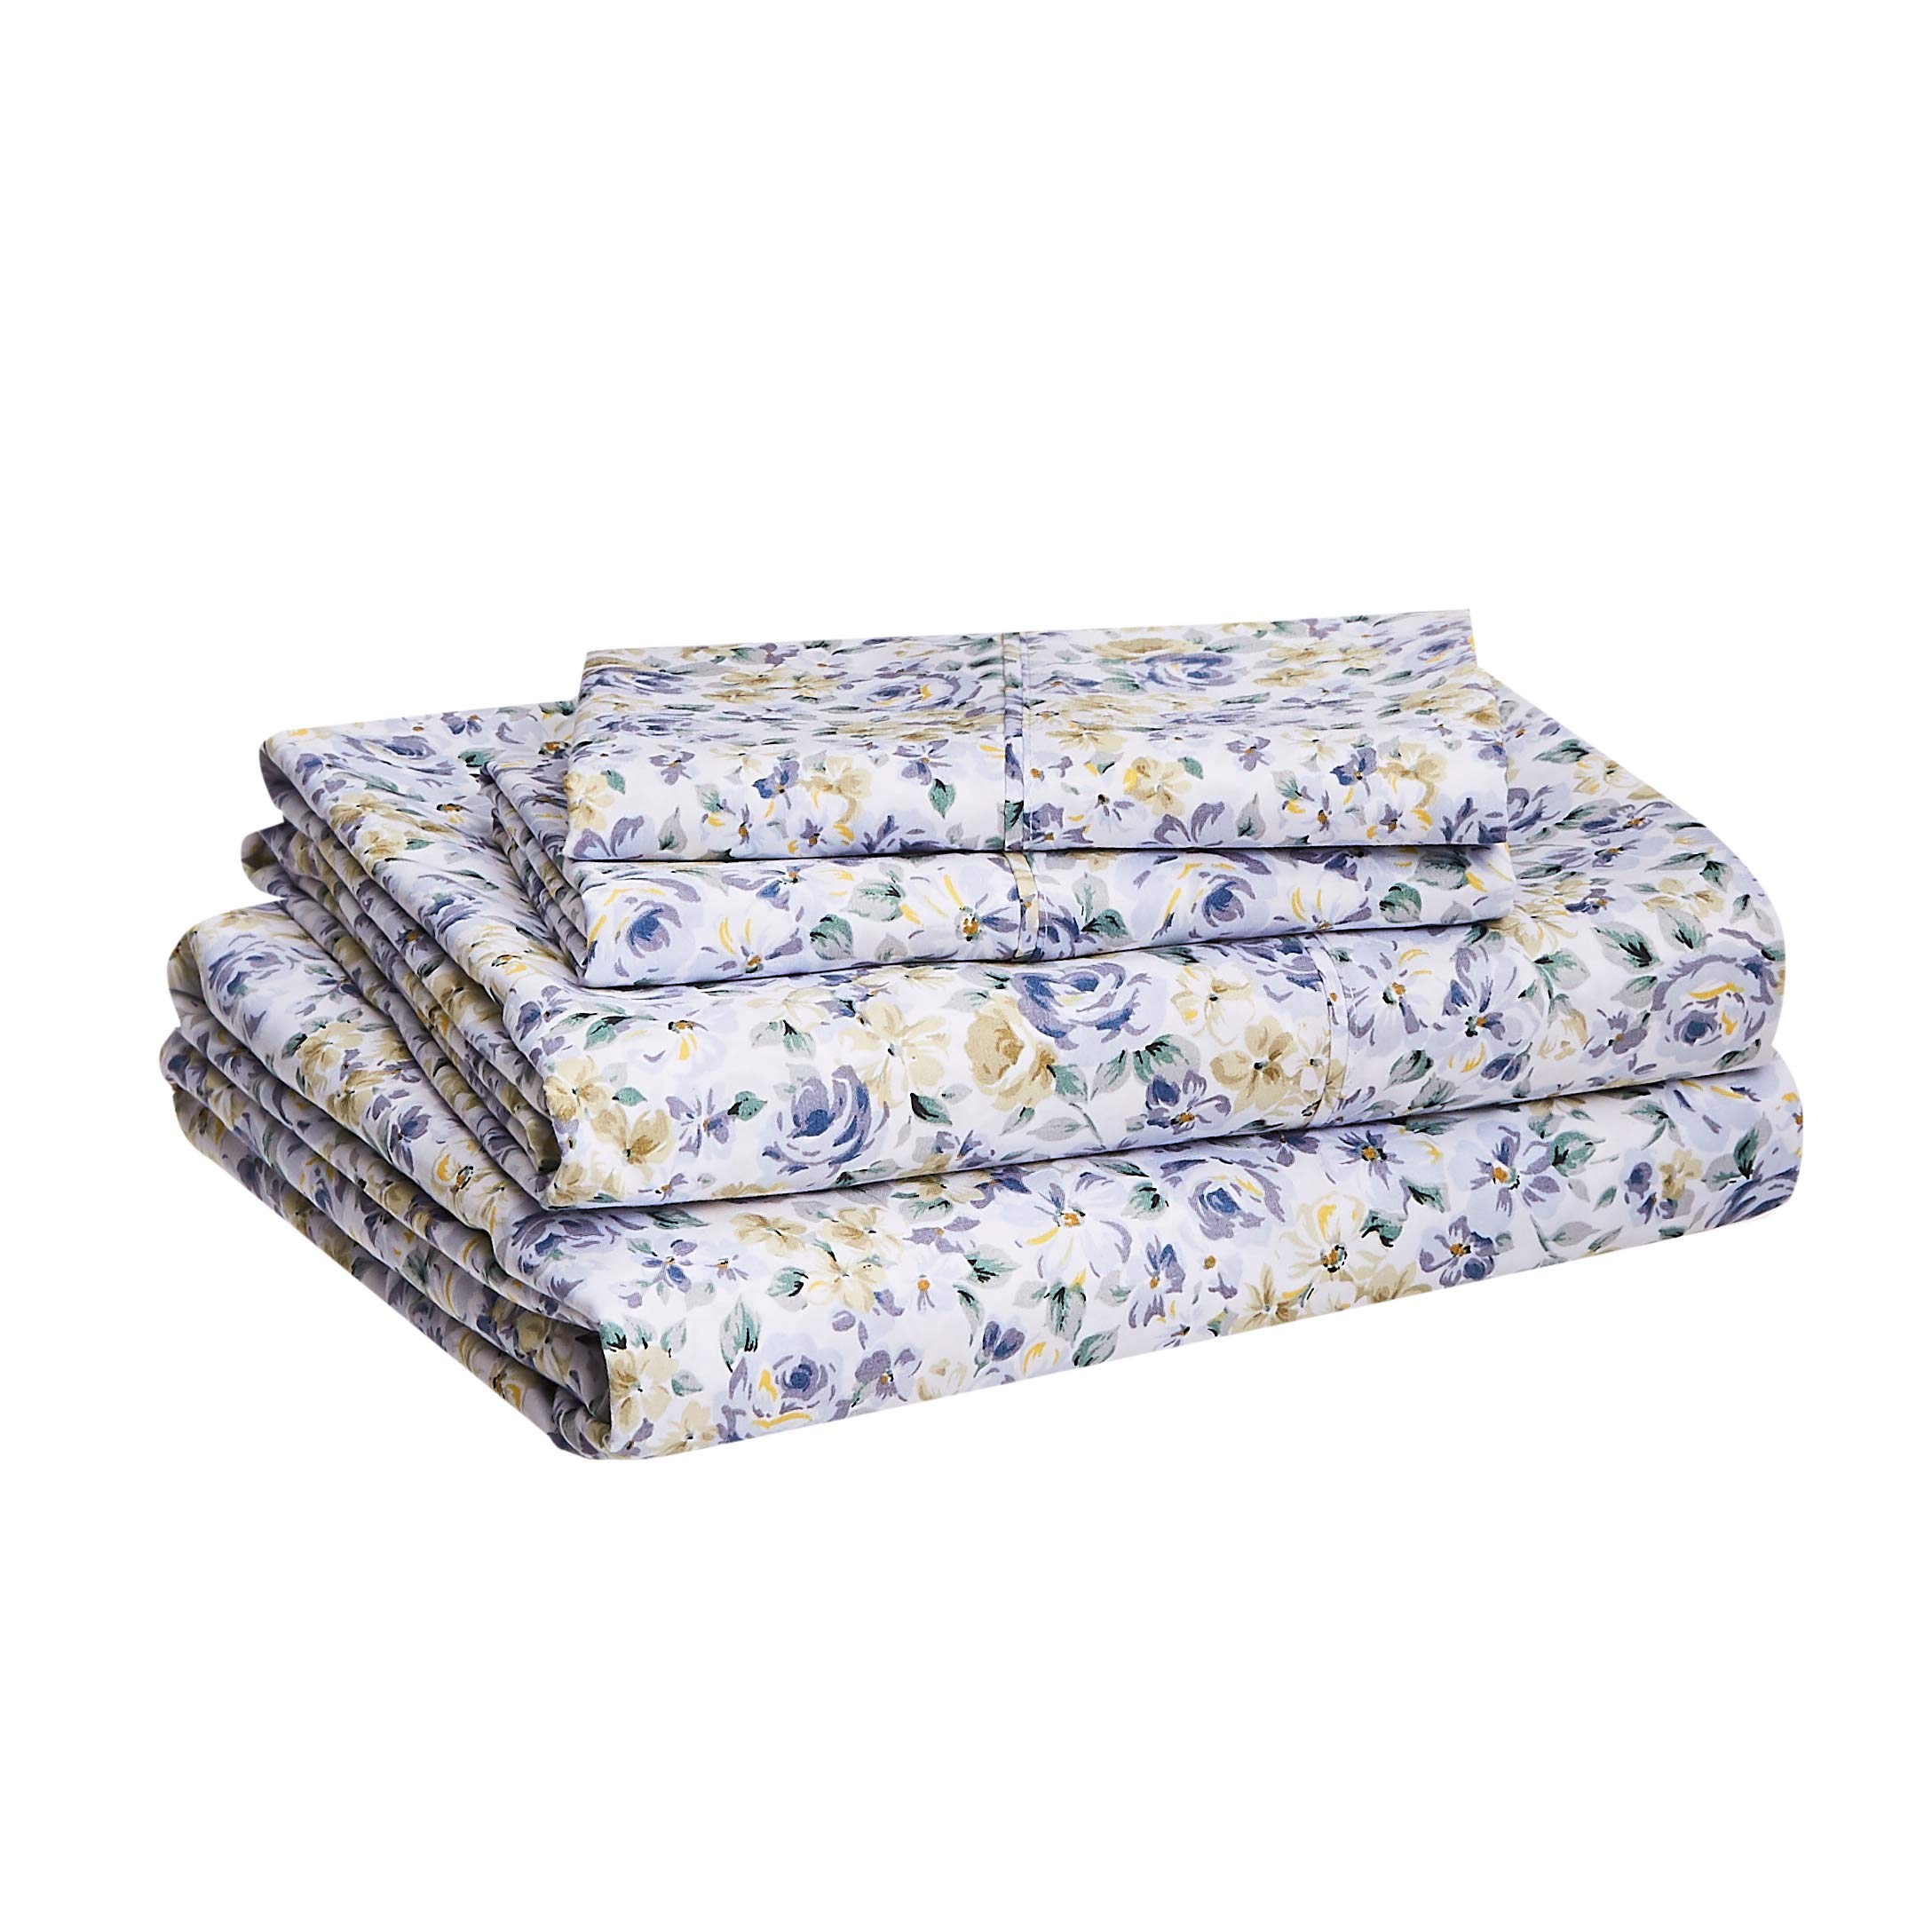 Book Cover Amazon Basics Lightweight Super Soft Easy Care Microfiber Bed Sheet Set with 14-Inch Deep Pockets - Queen, Blue Floral Queen Sheet Set Blue Floral